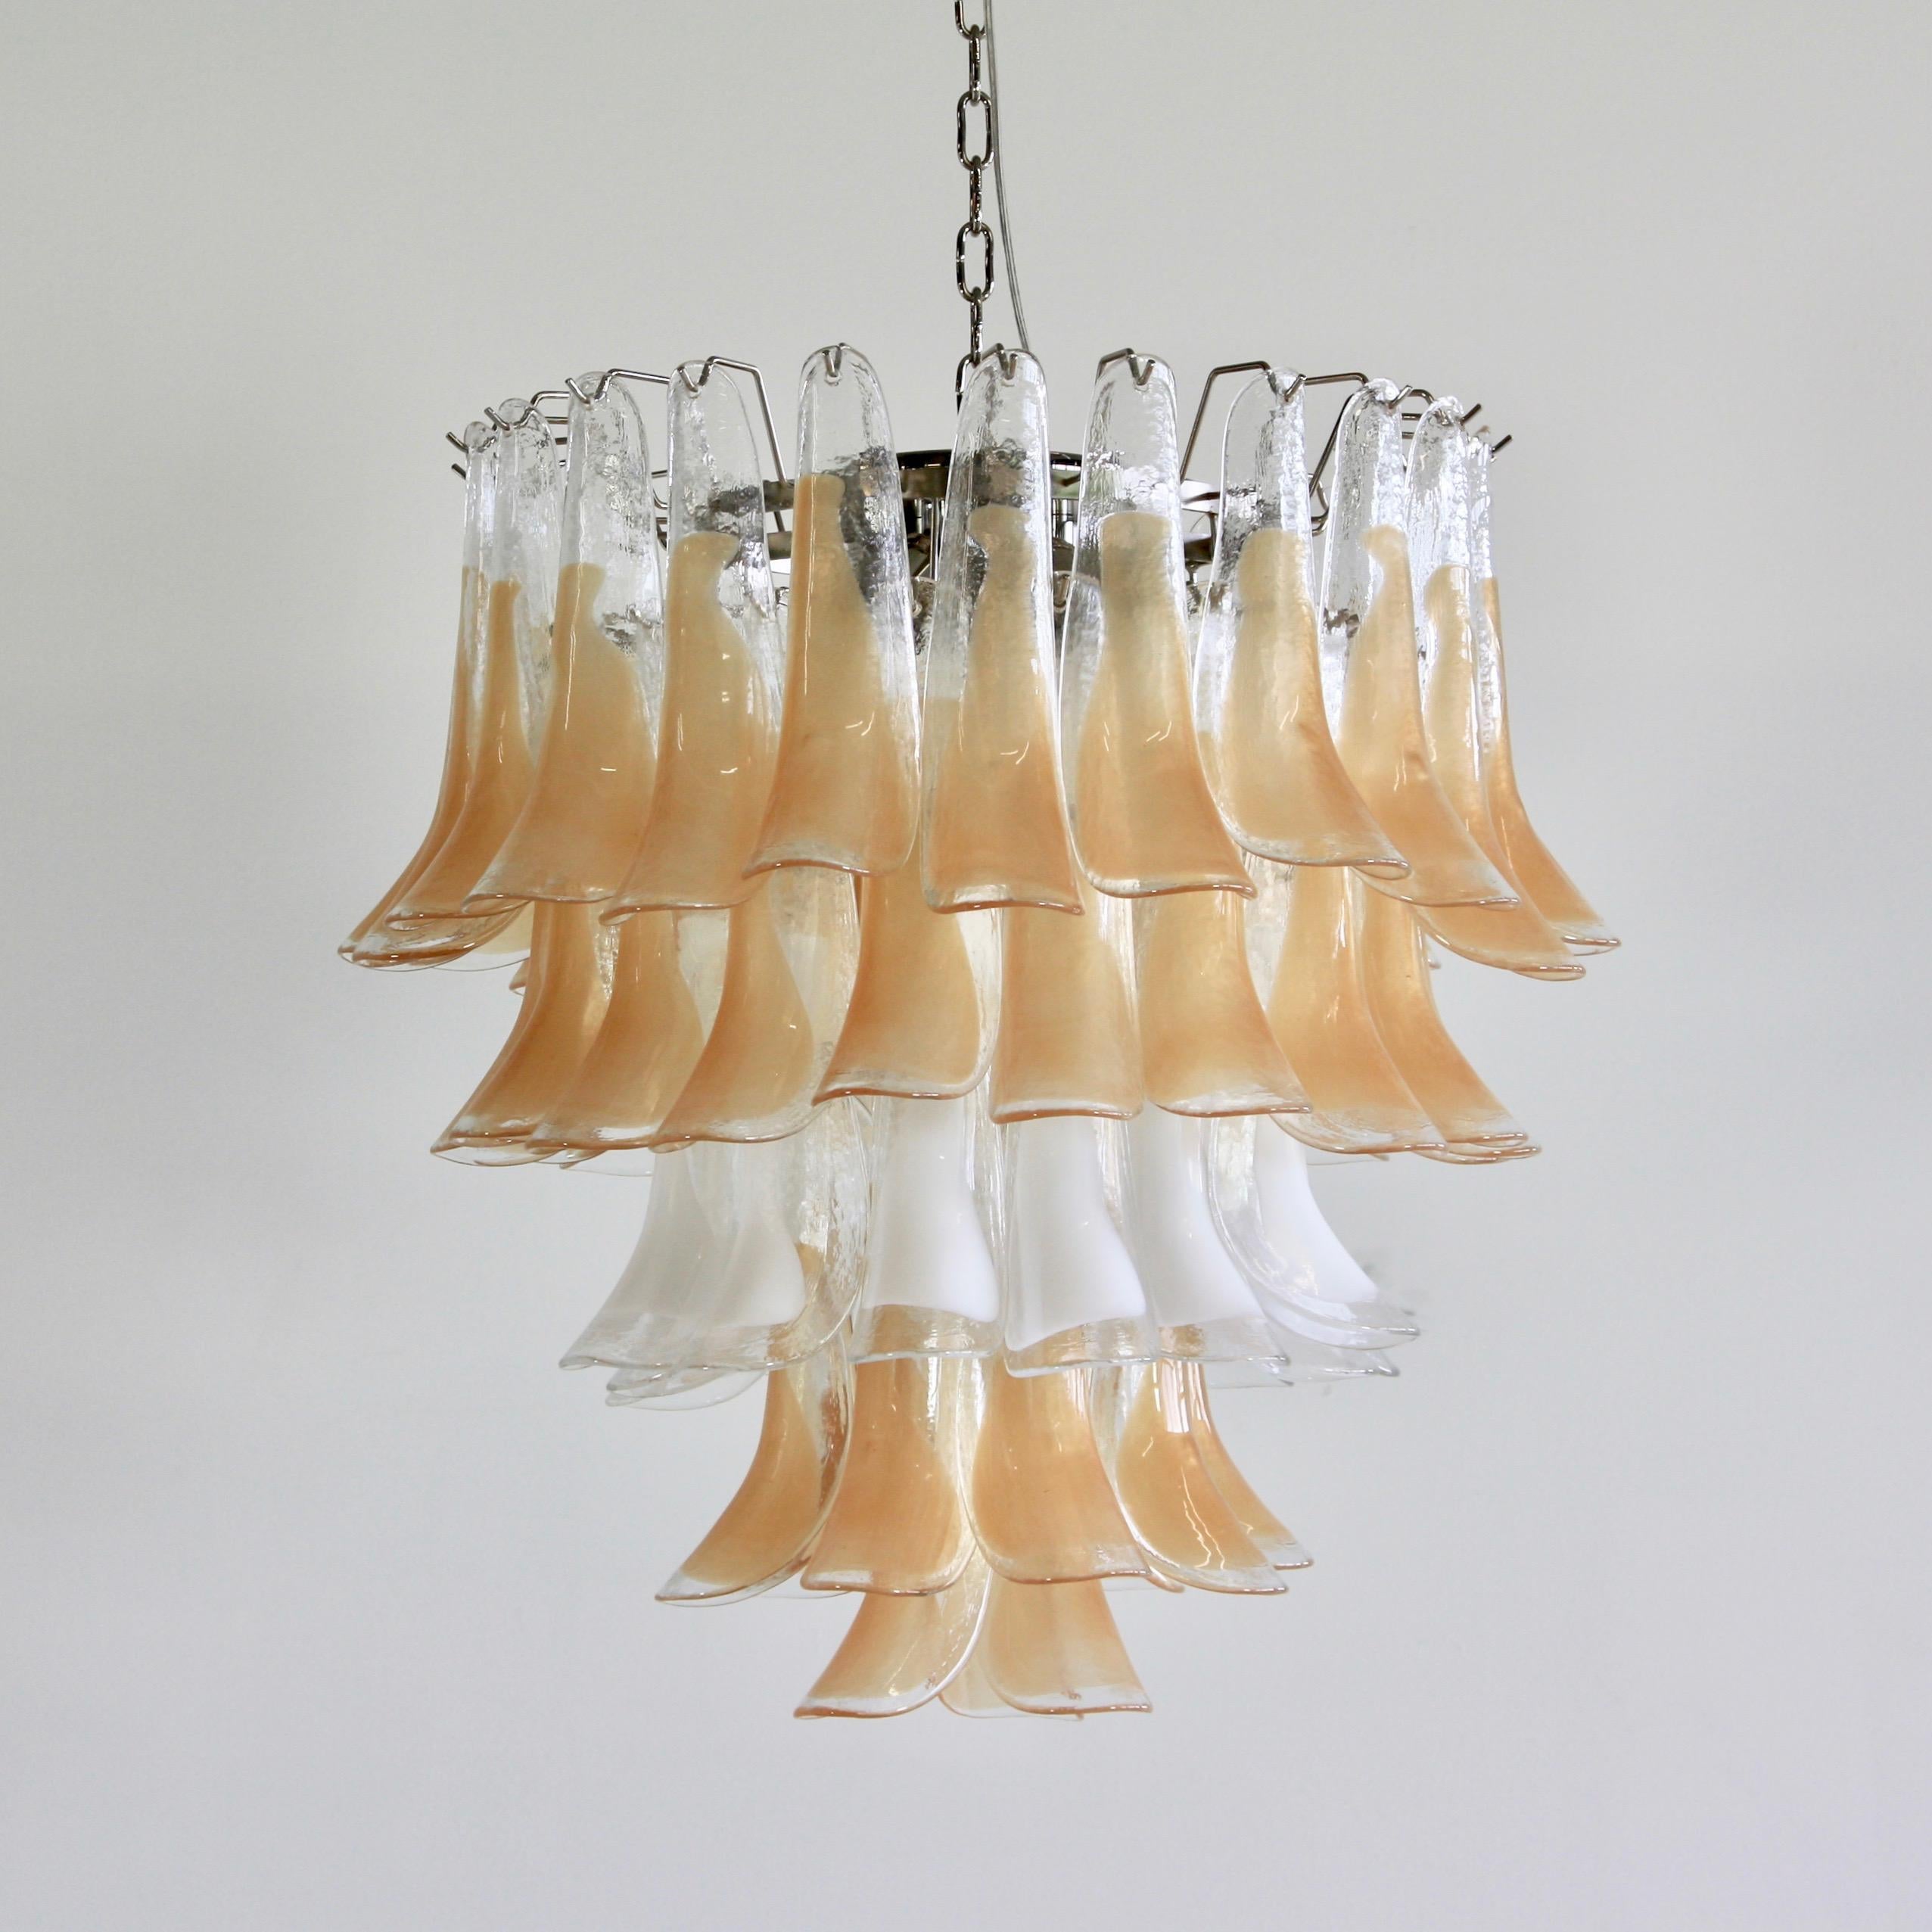 Late 20th Century Murano Glass Saddle Form Chandelier 'Peach and White'